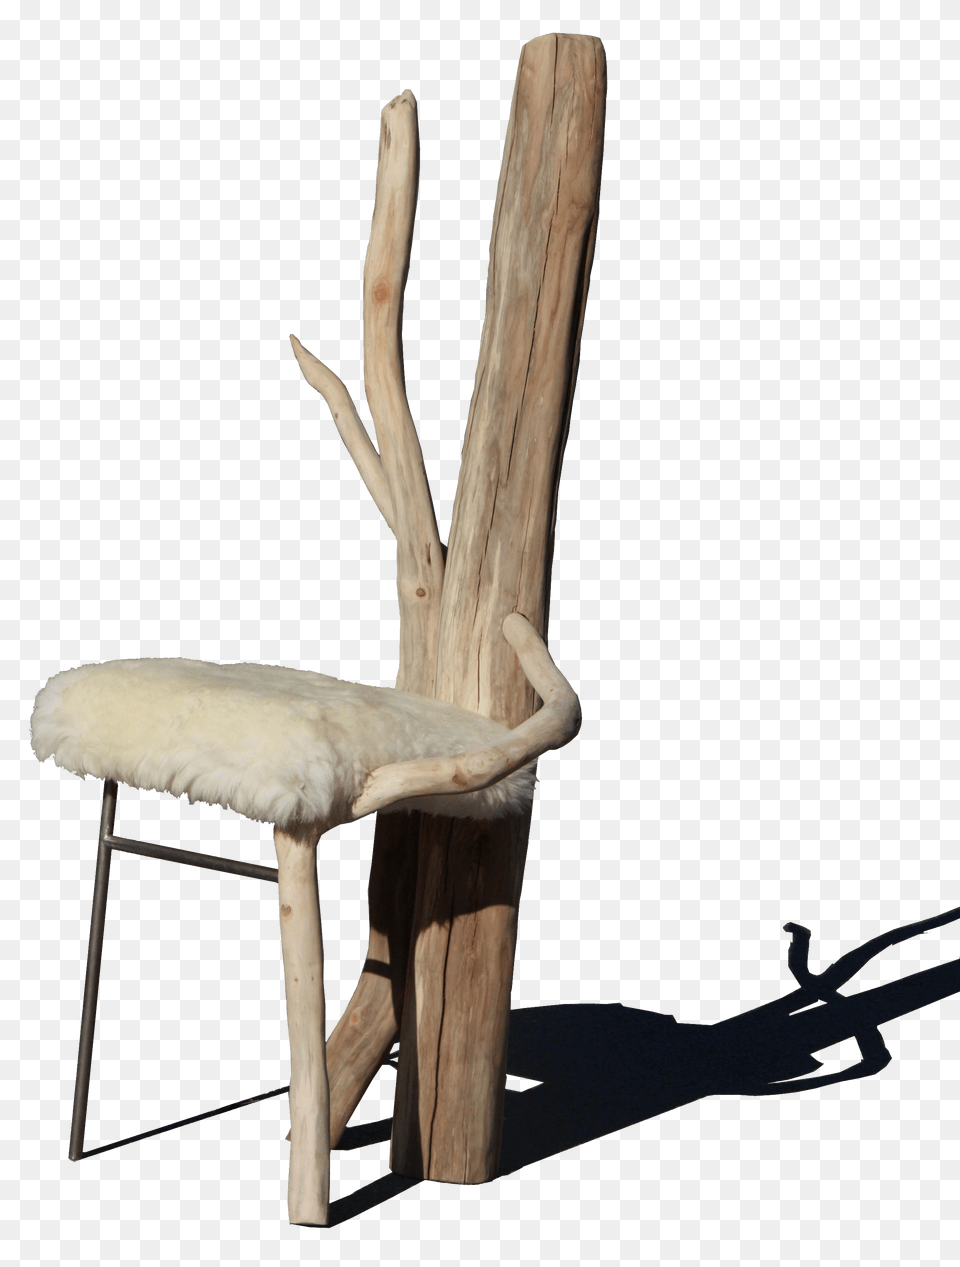 Kim Denise, Furniture, Wood, Chair Png Image